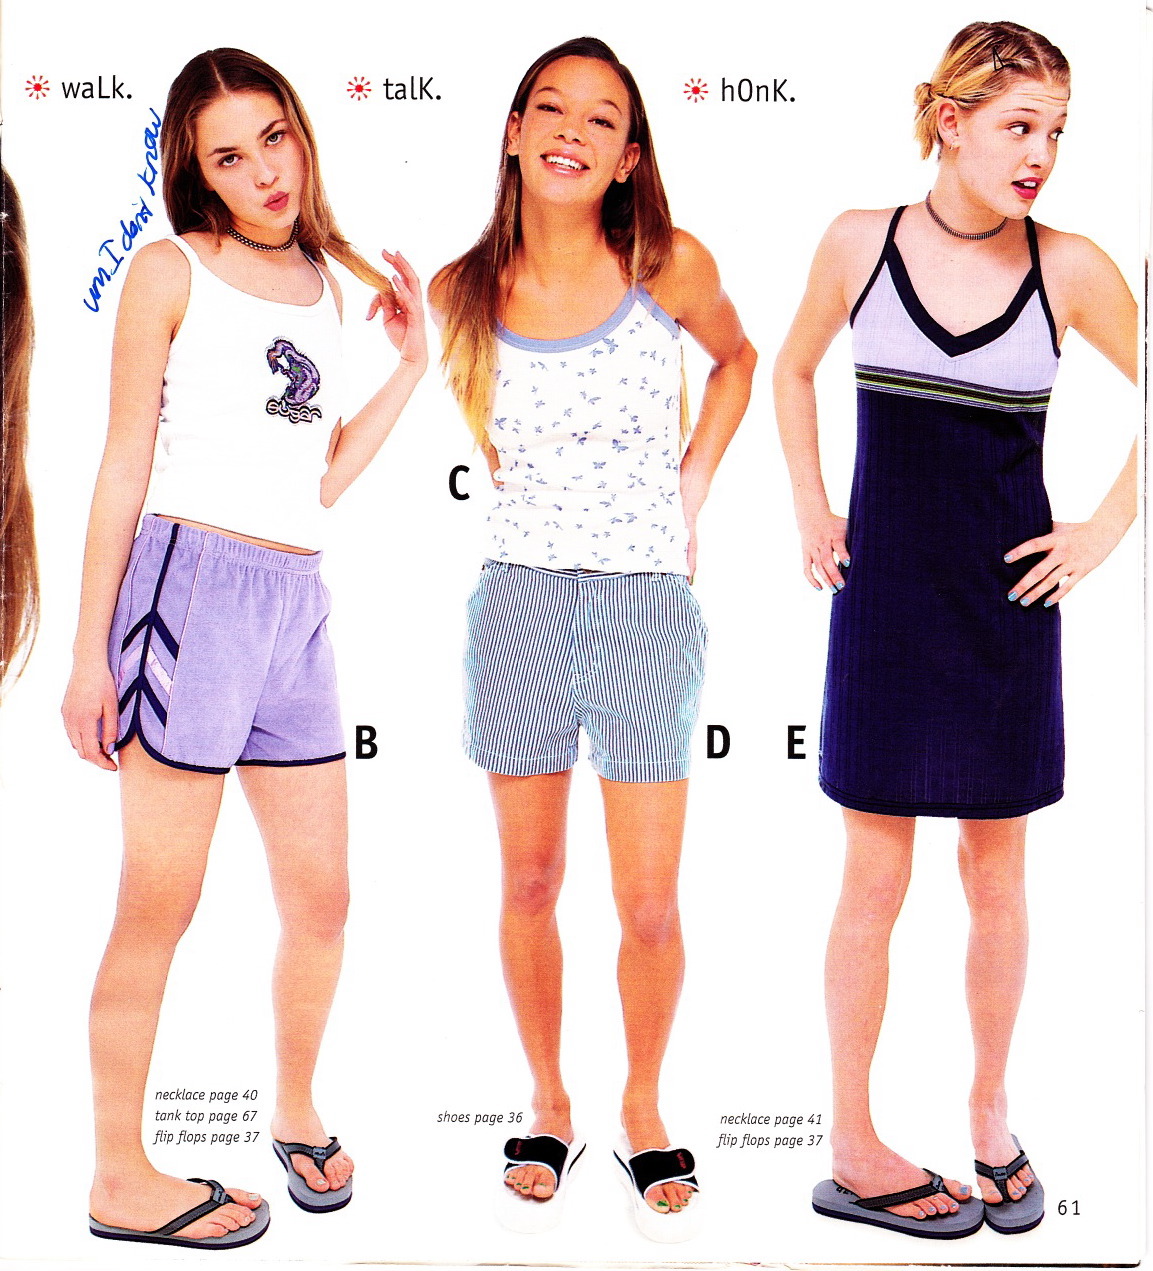 This Marked Up 1998 Delia S Catalog Is Everything We Ll Miss About Our Fave Teen Retailer